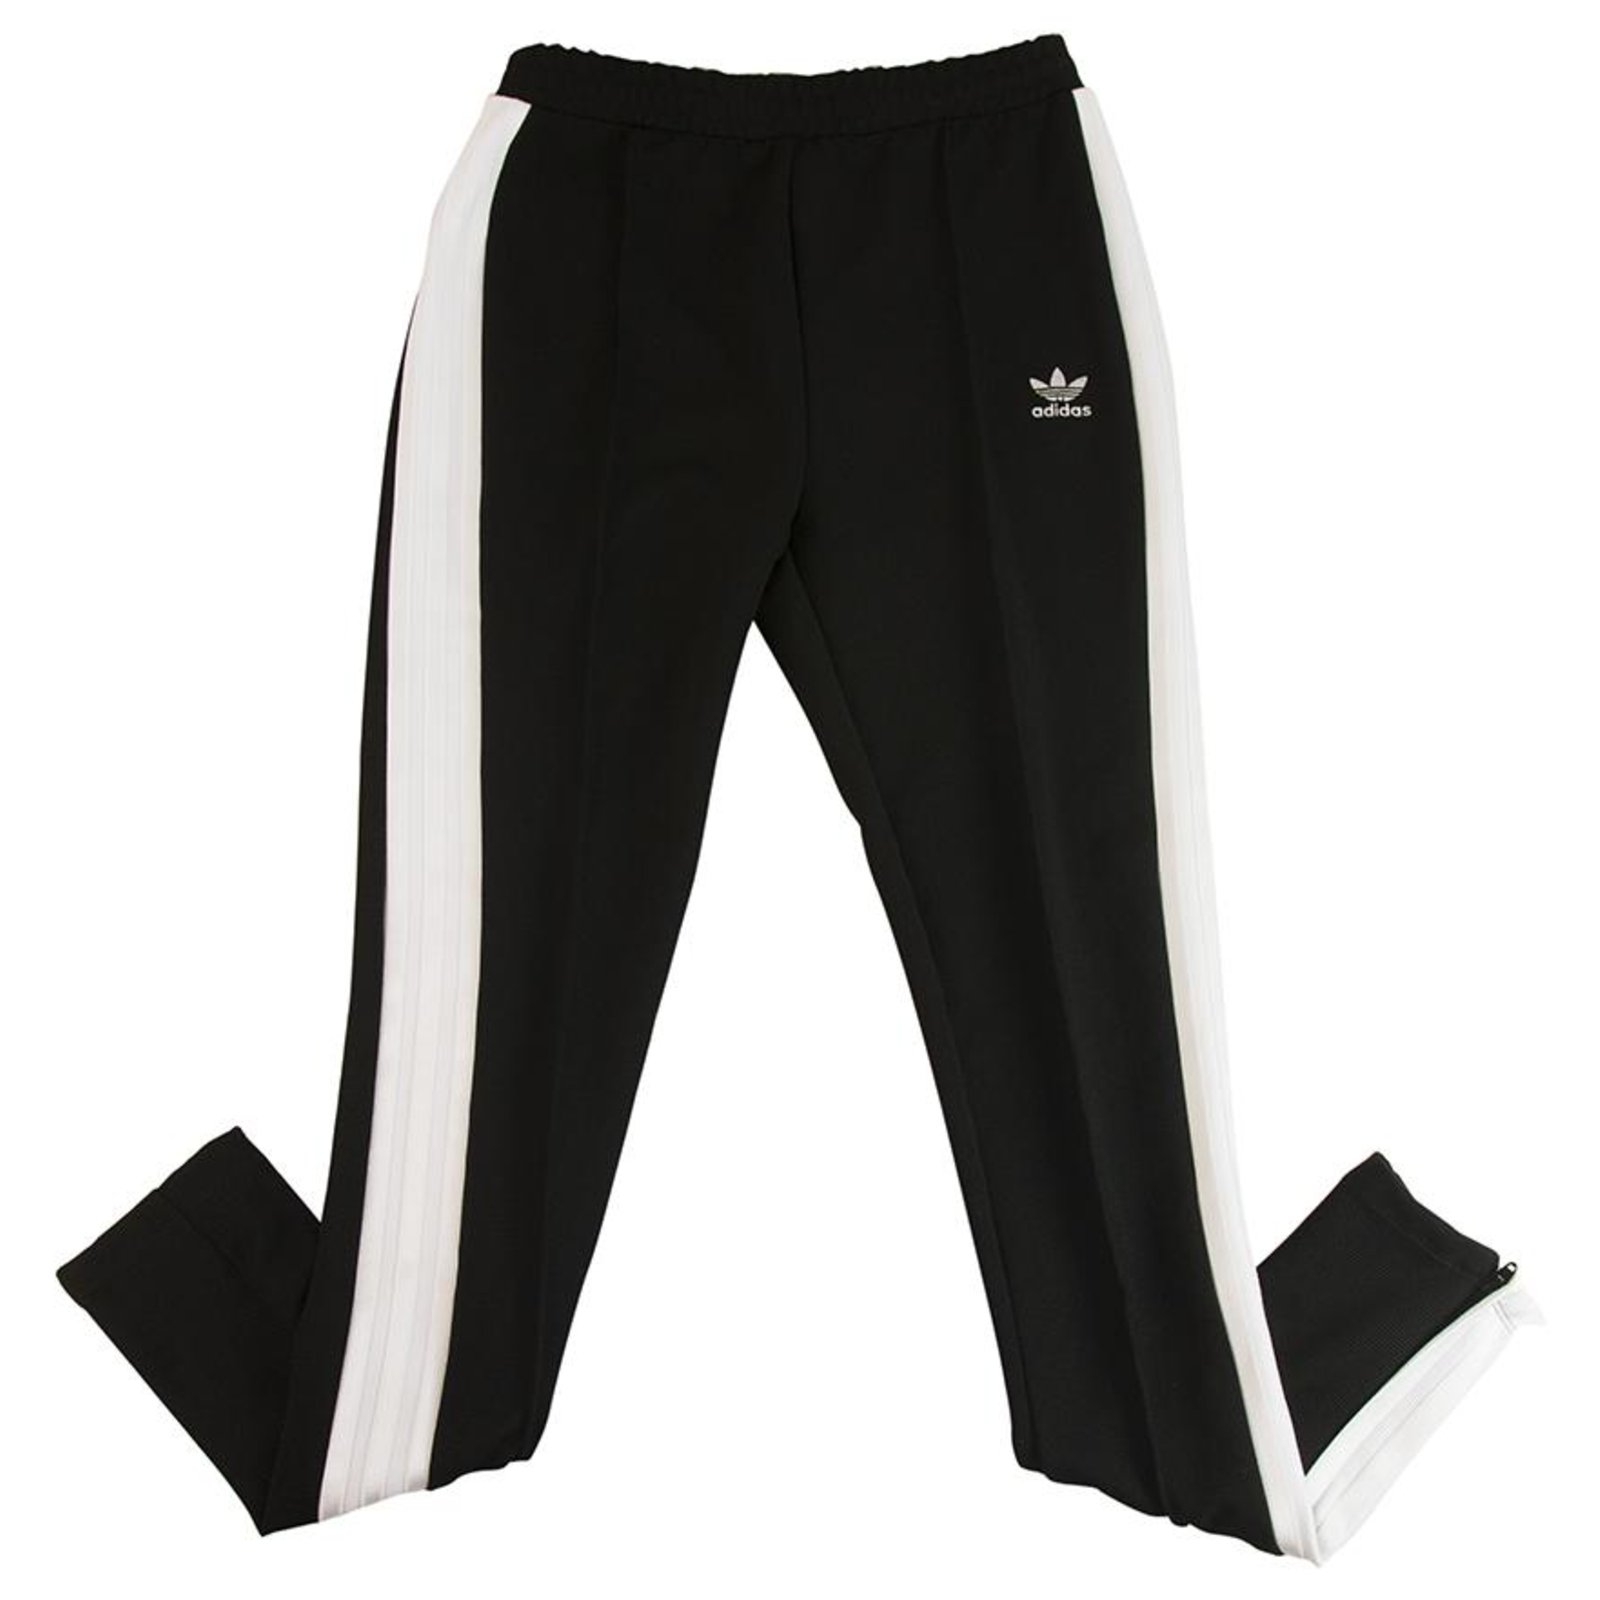 adidas black and white striped pants